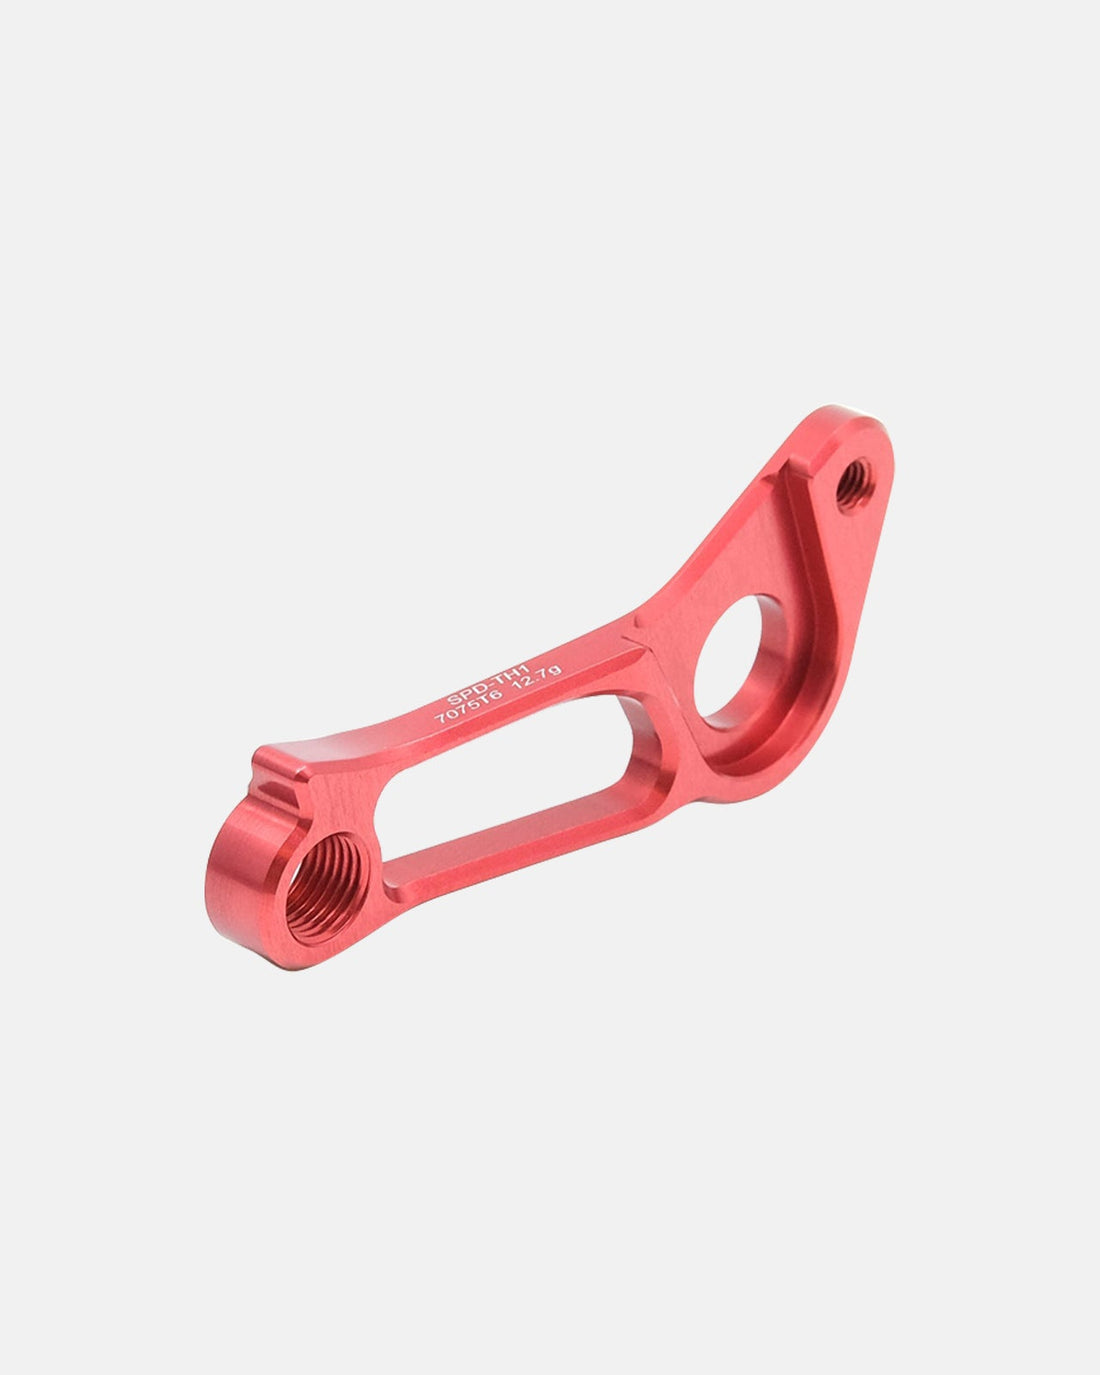 Sigeyi Specialized Direct-Mount Derailleur Hanger - Red - Sigeyi